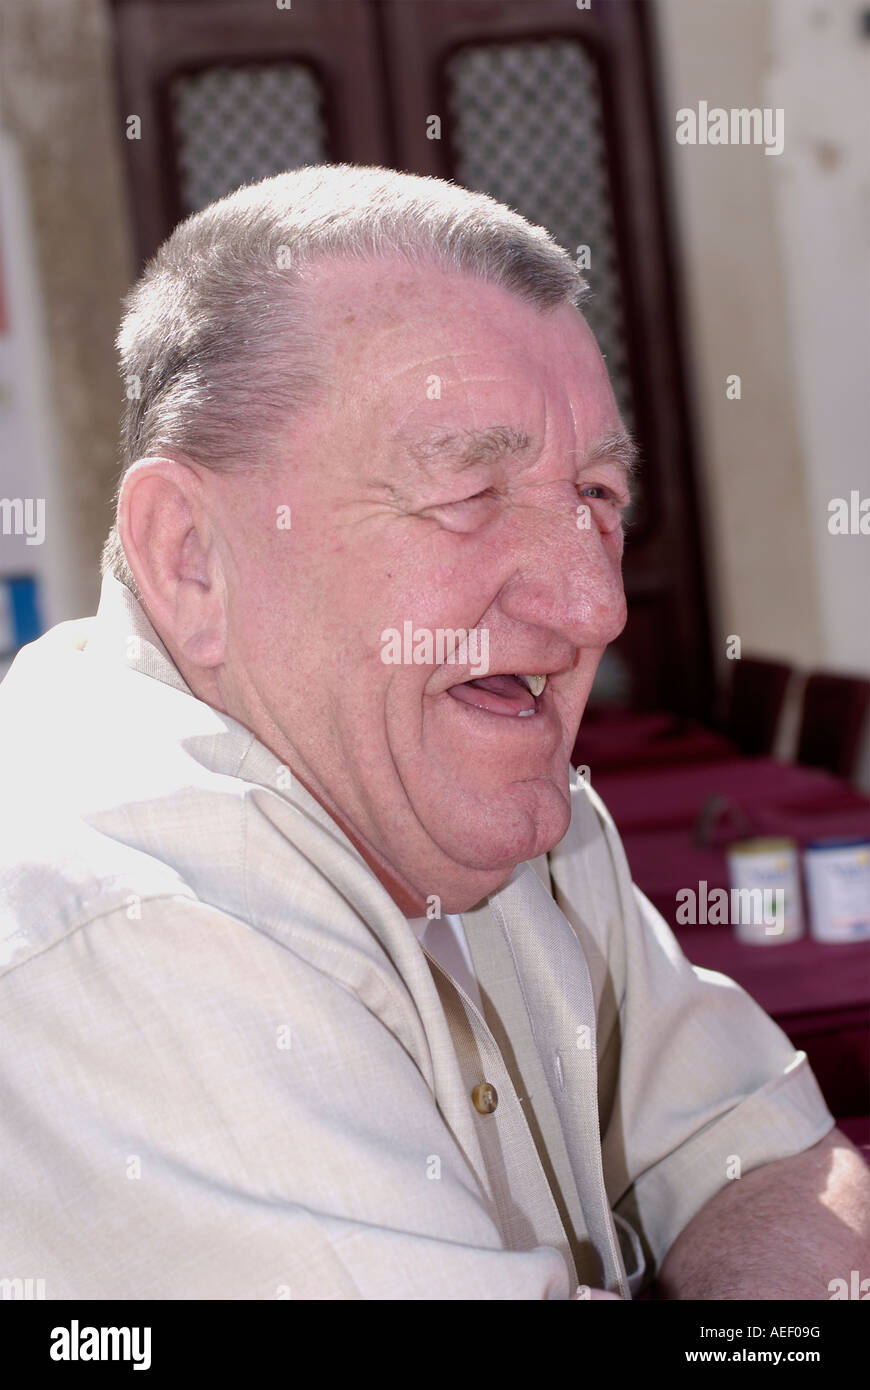 An old red faced toothless man laughing Stock Photo